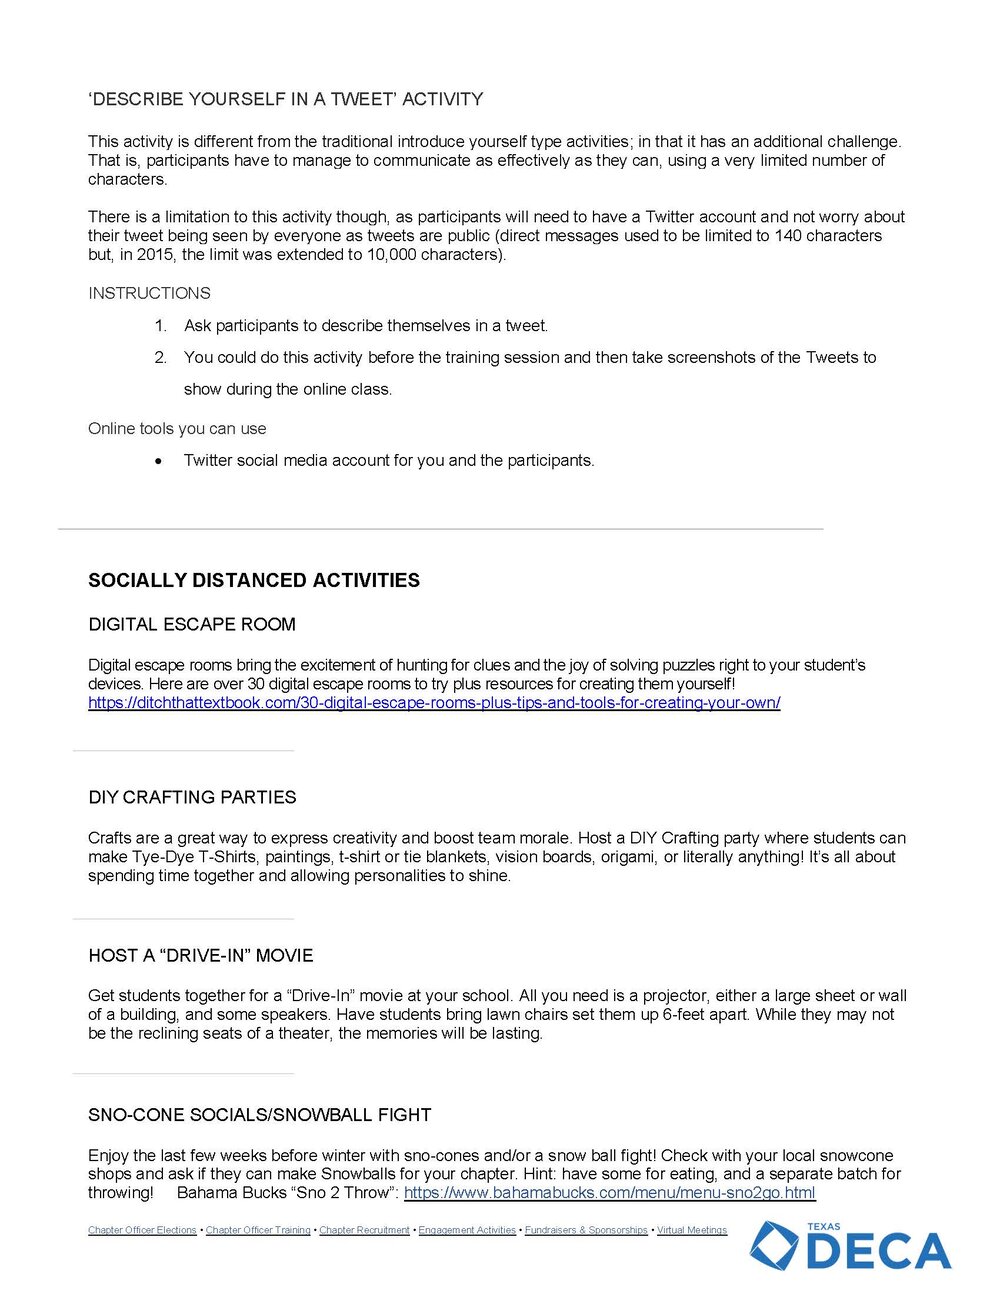 Chapter Toolkit - Texas DECA_Page_12.jpg